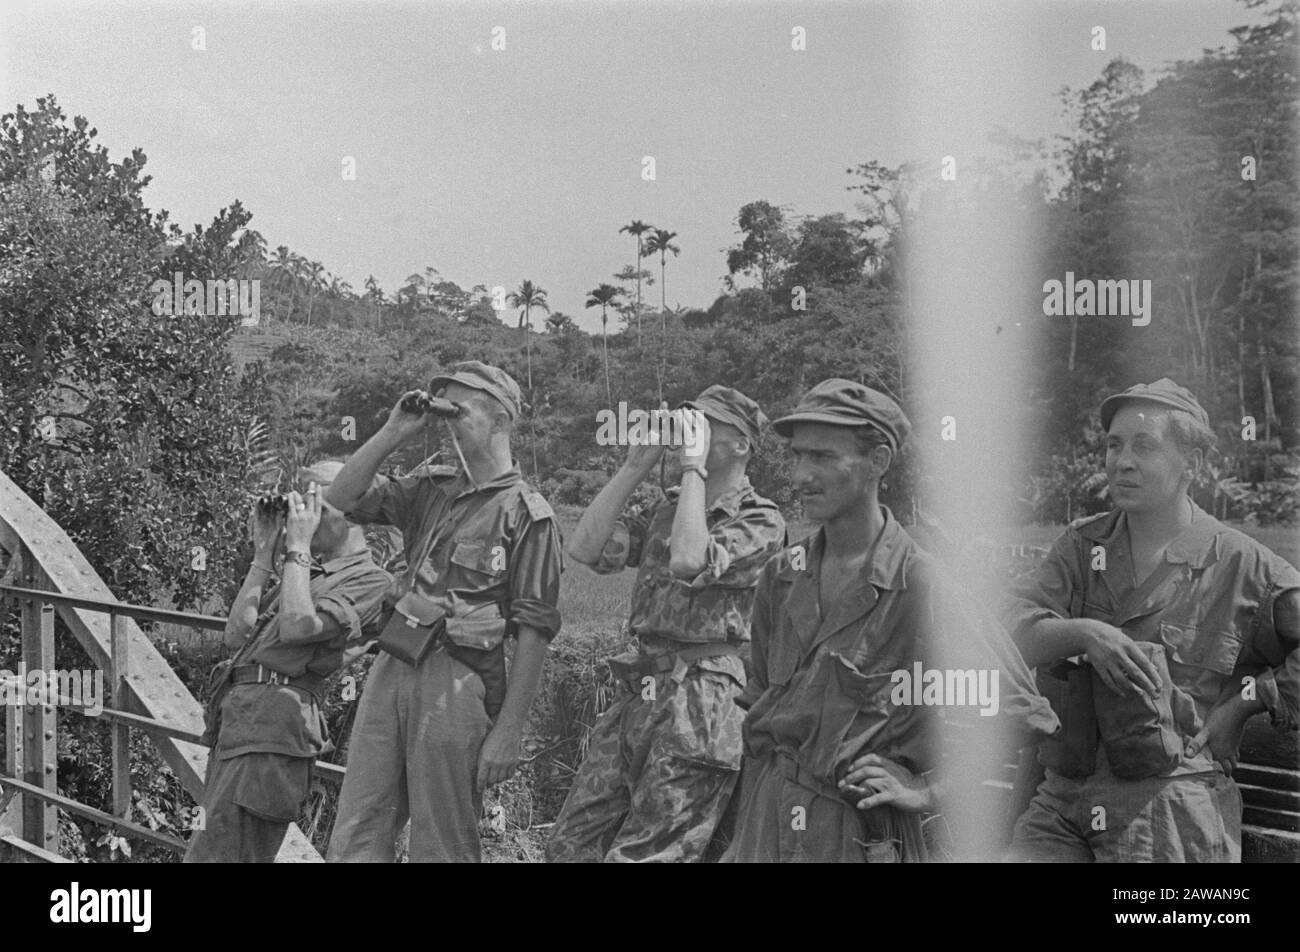 Photoreportage near Buitenzorg  Soldiers on a Bailey bridge. Two officers watching with binoculars Date: January 1947 Location: Bogor, Indonesia, Java, Dutch East Indies Stock Photo